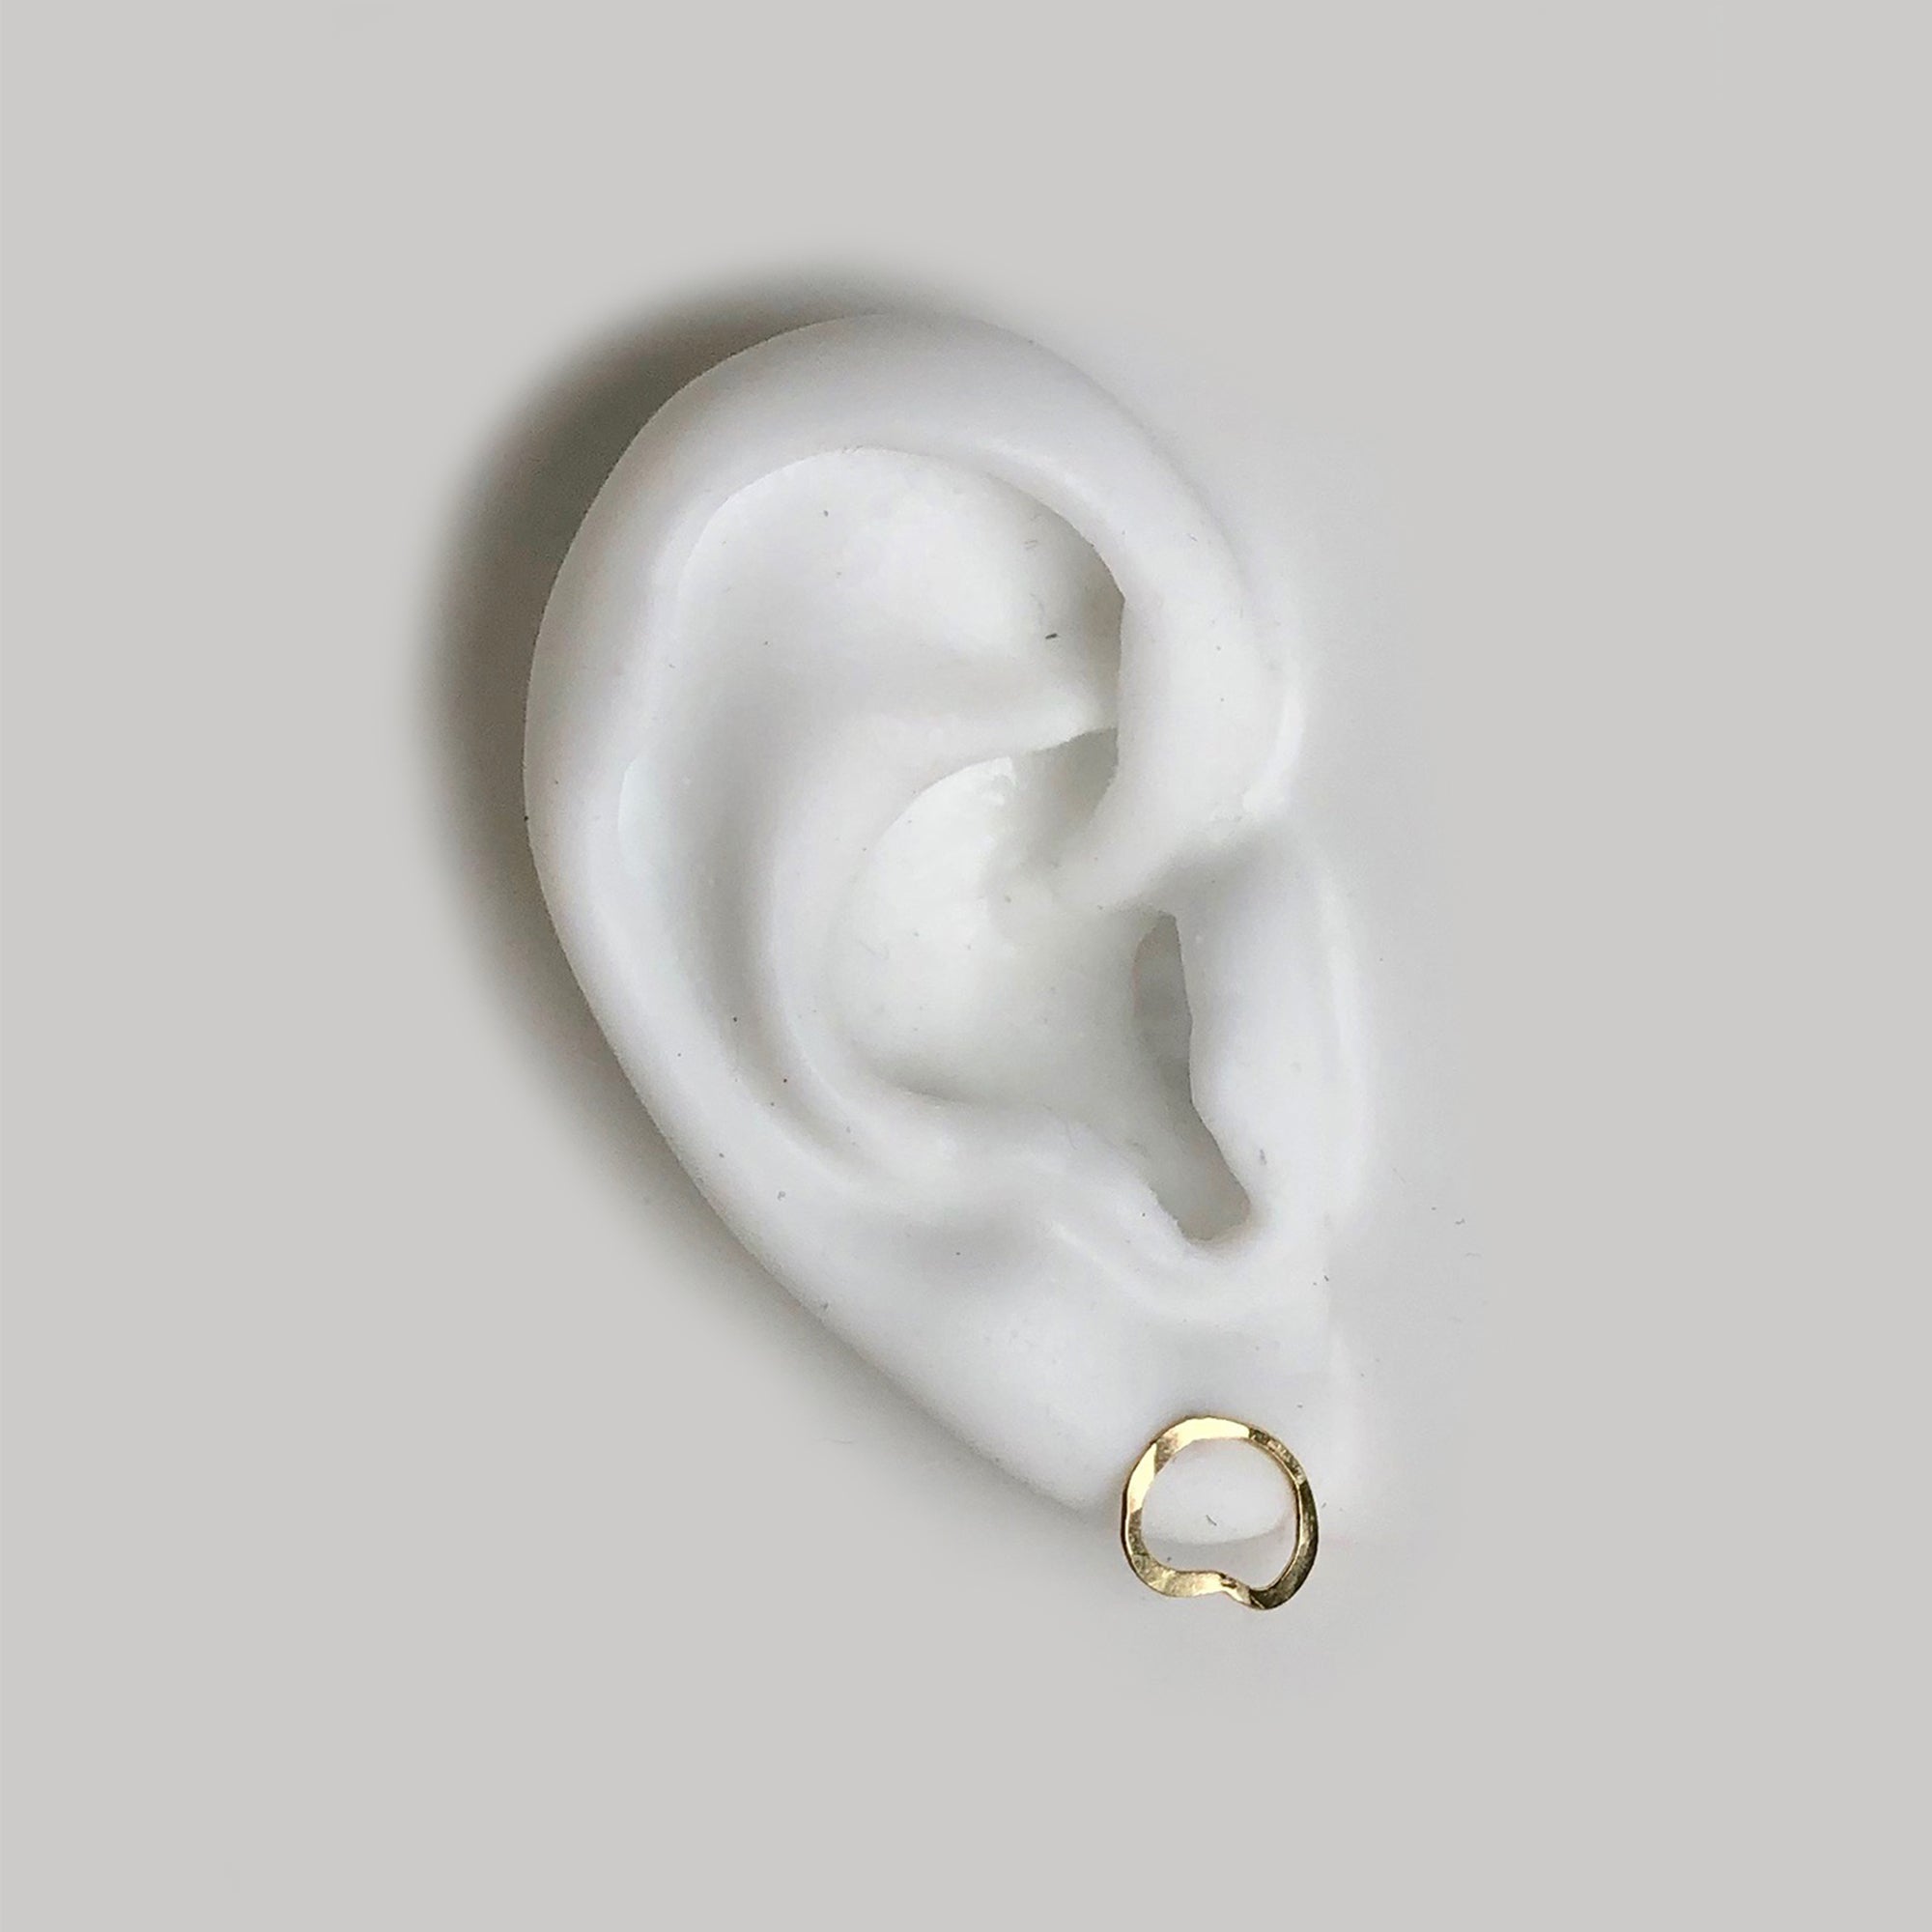 One-of-a-kind, 14k gold set features organic hand forged studs inspired by our collaboration with artist Callen Thompson 